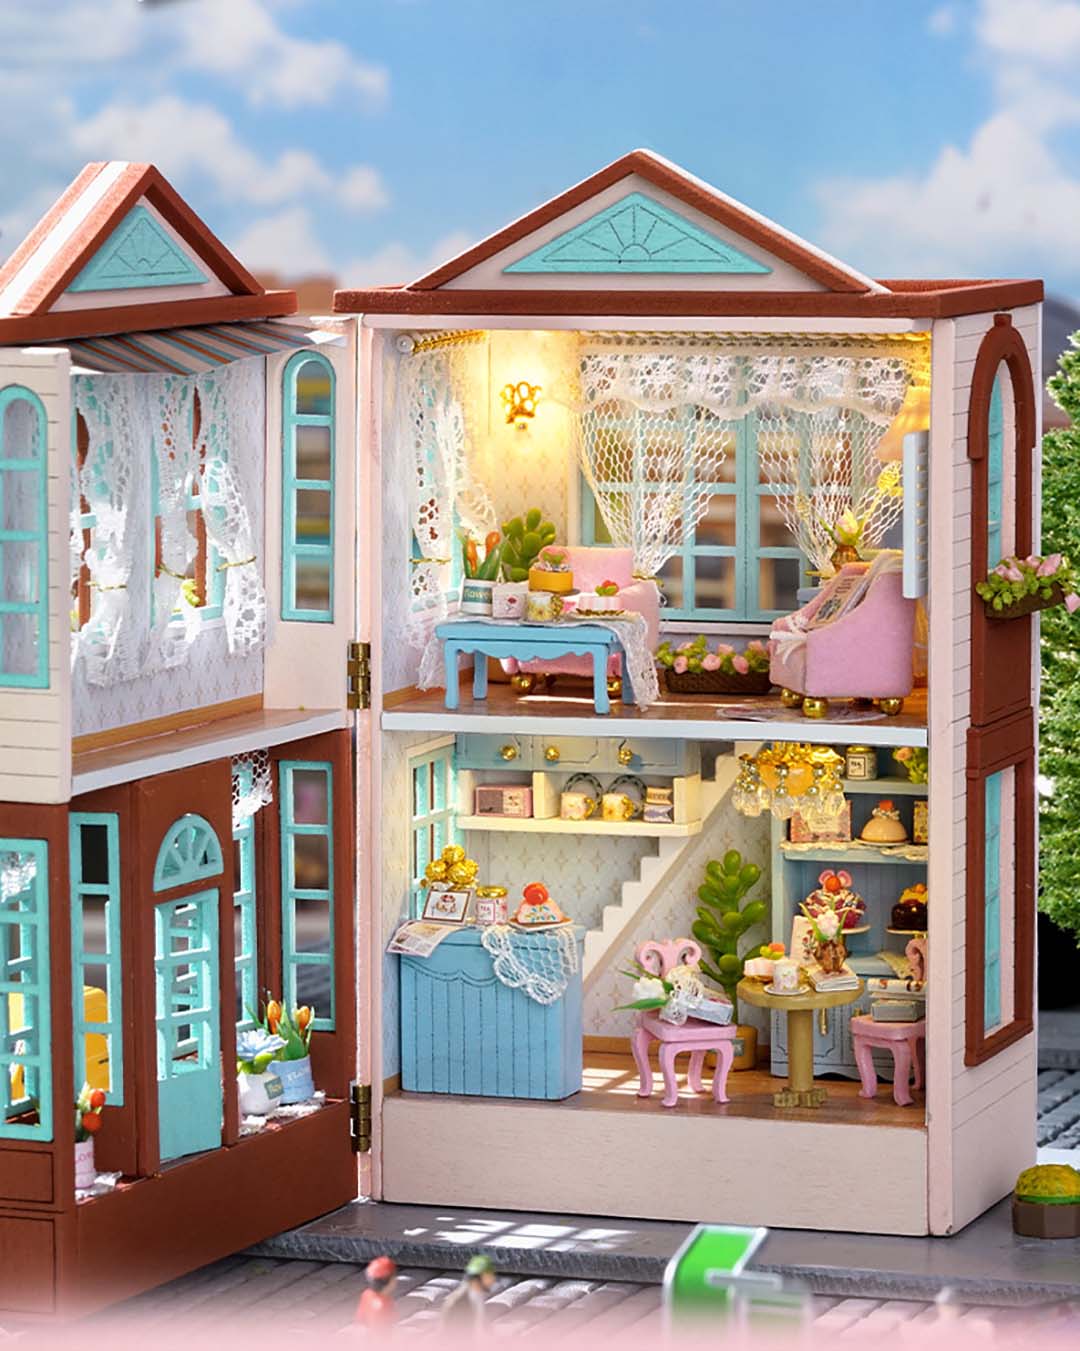 Special Gift Shop DIY Miniature House Kit